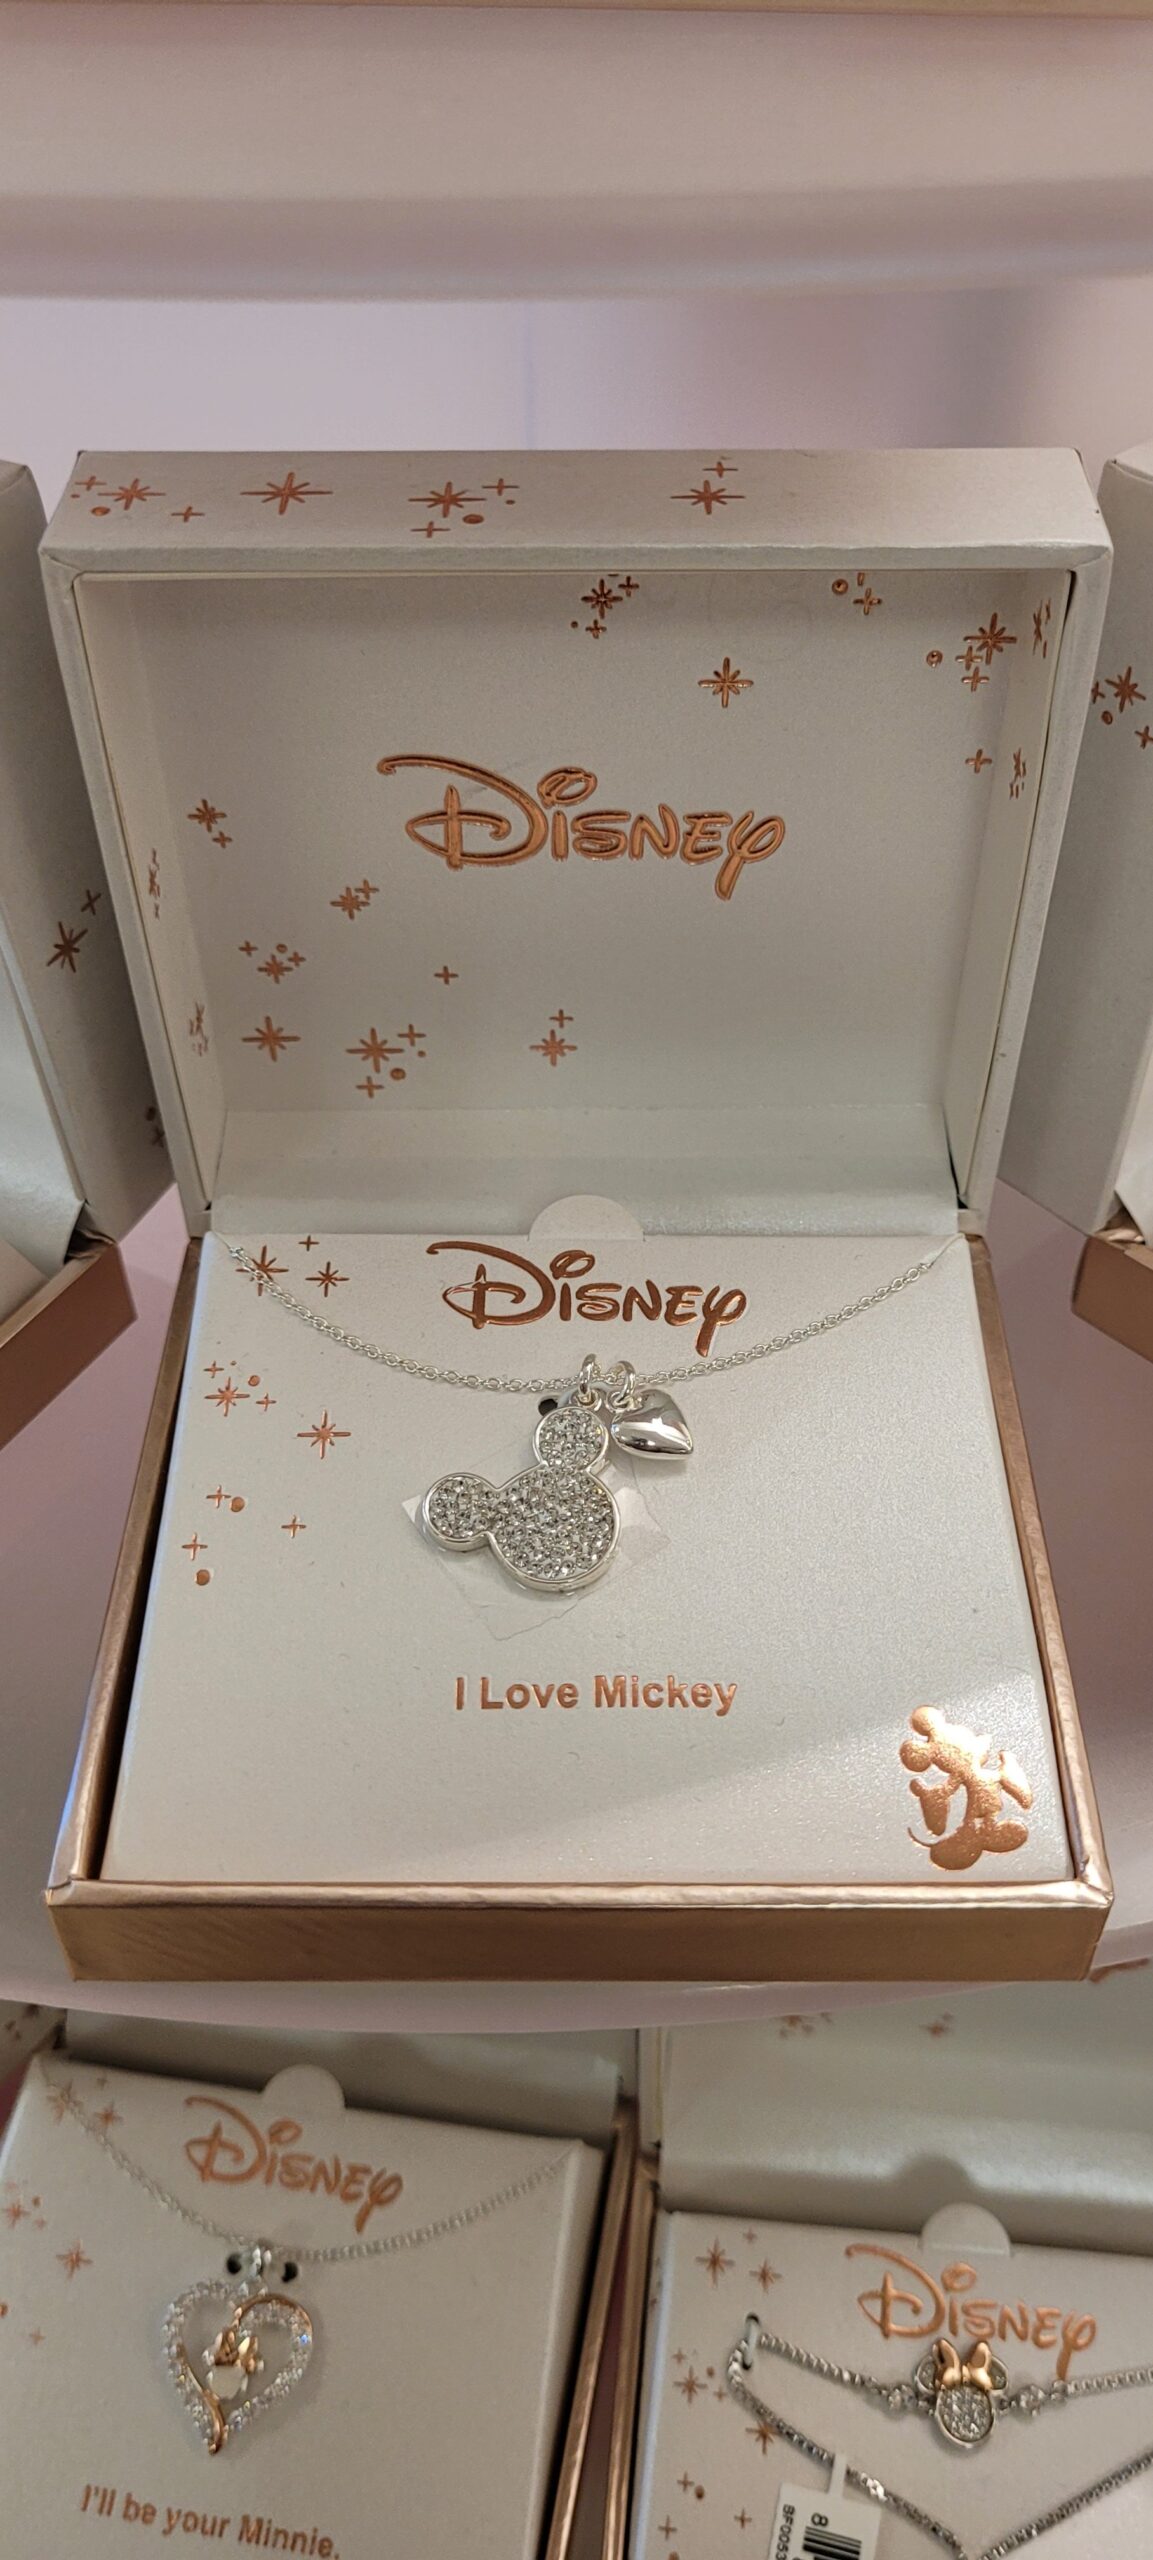 Shimmering Disney Jewelry From Kohl's Add A Touch of Sparkle